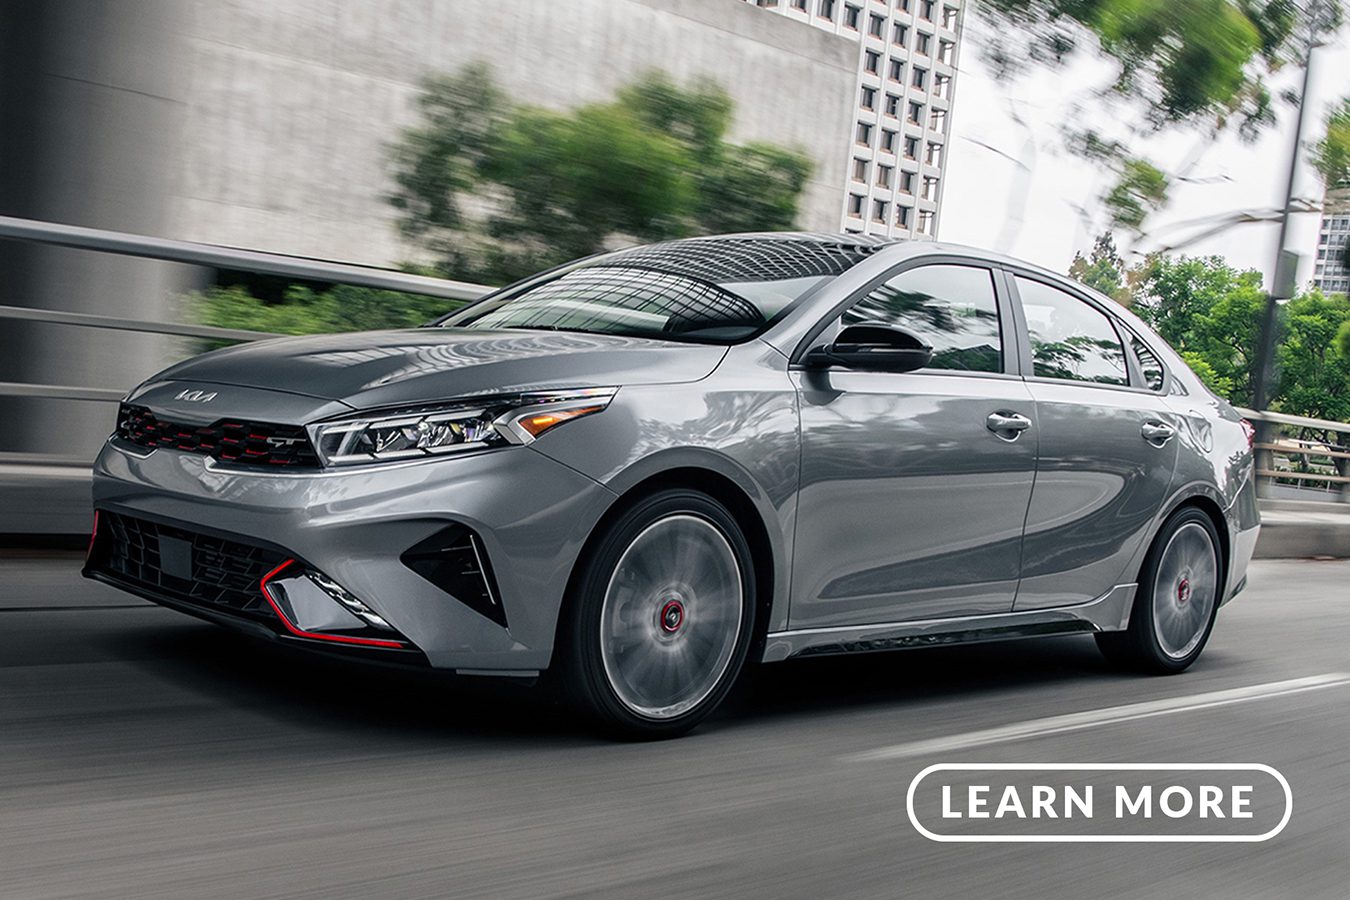 The 2019 kia forte is driving down a city street.